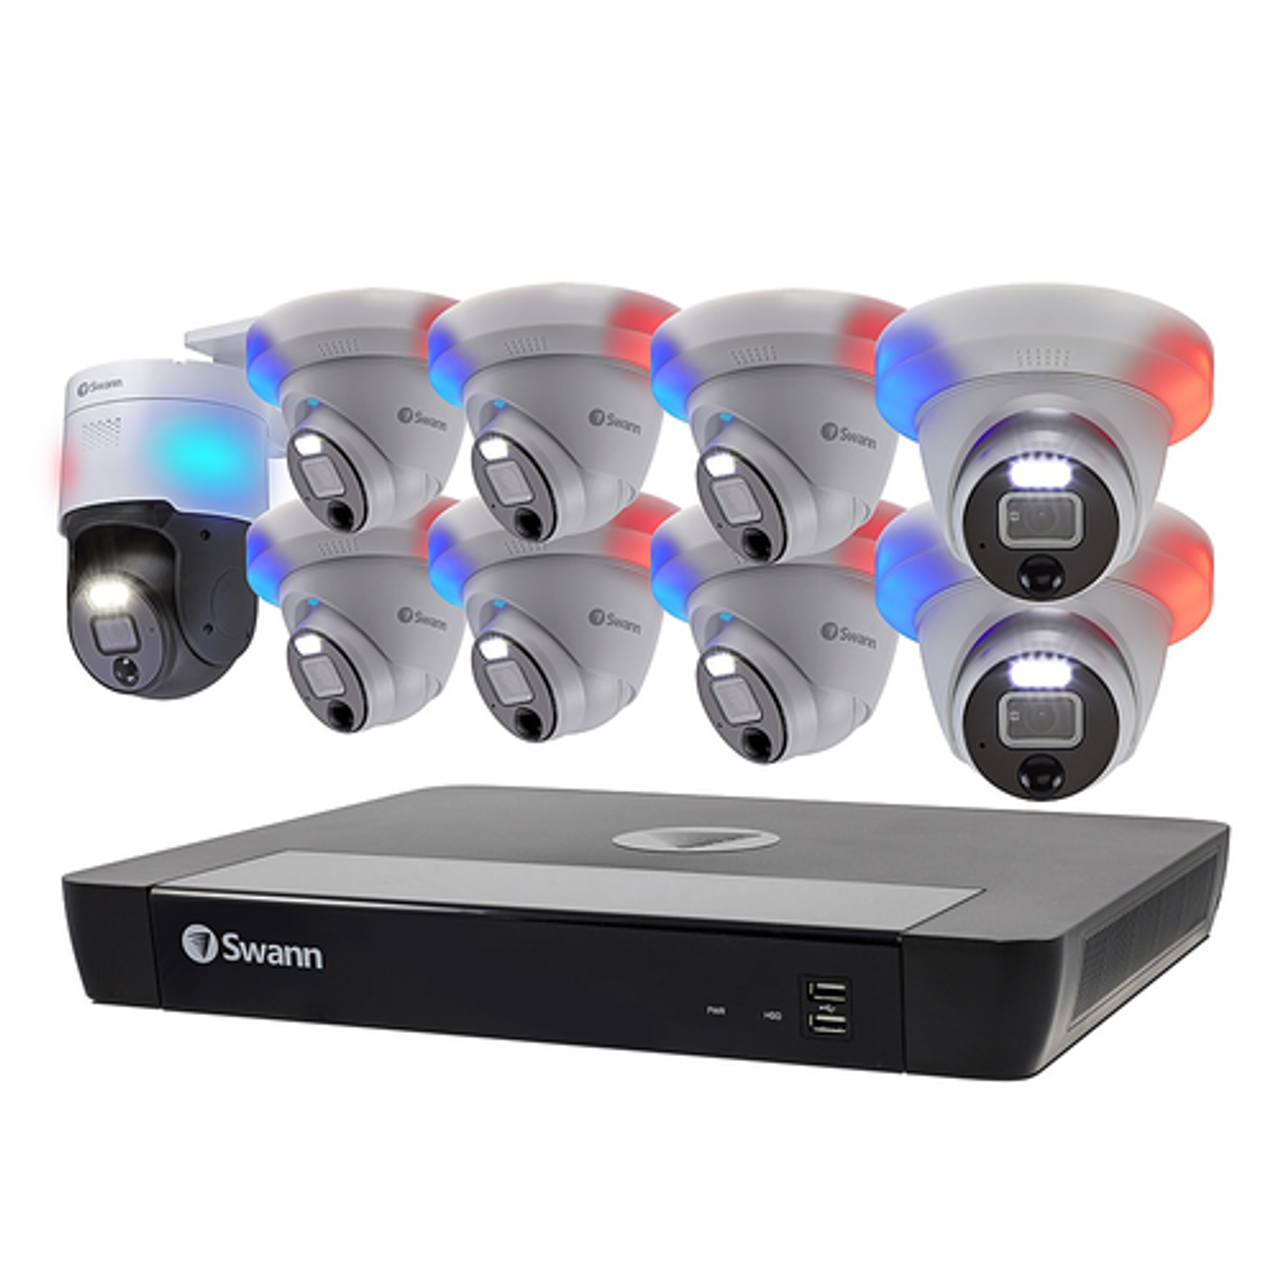 Swann - Enforcer NVR 16 Channel with 8 Enforcer Dome 12 MP Cameras with PT900 4K Pan and Tilt Camera - White